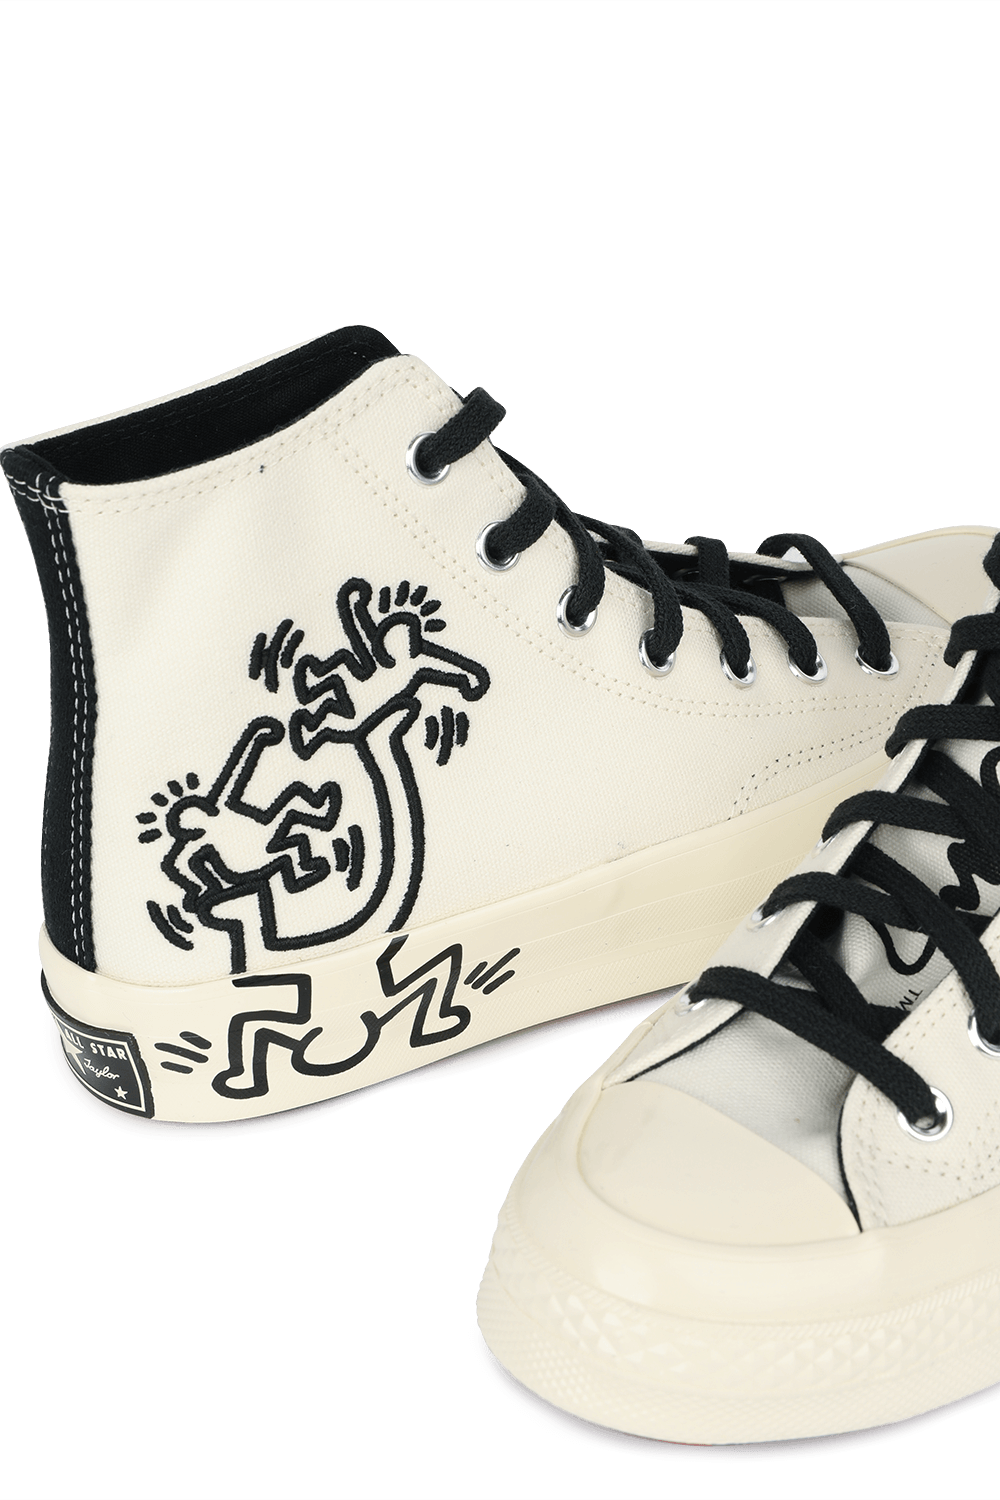 Converse X Keith Haring Chuck 70 in White CONVERSE